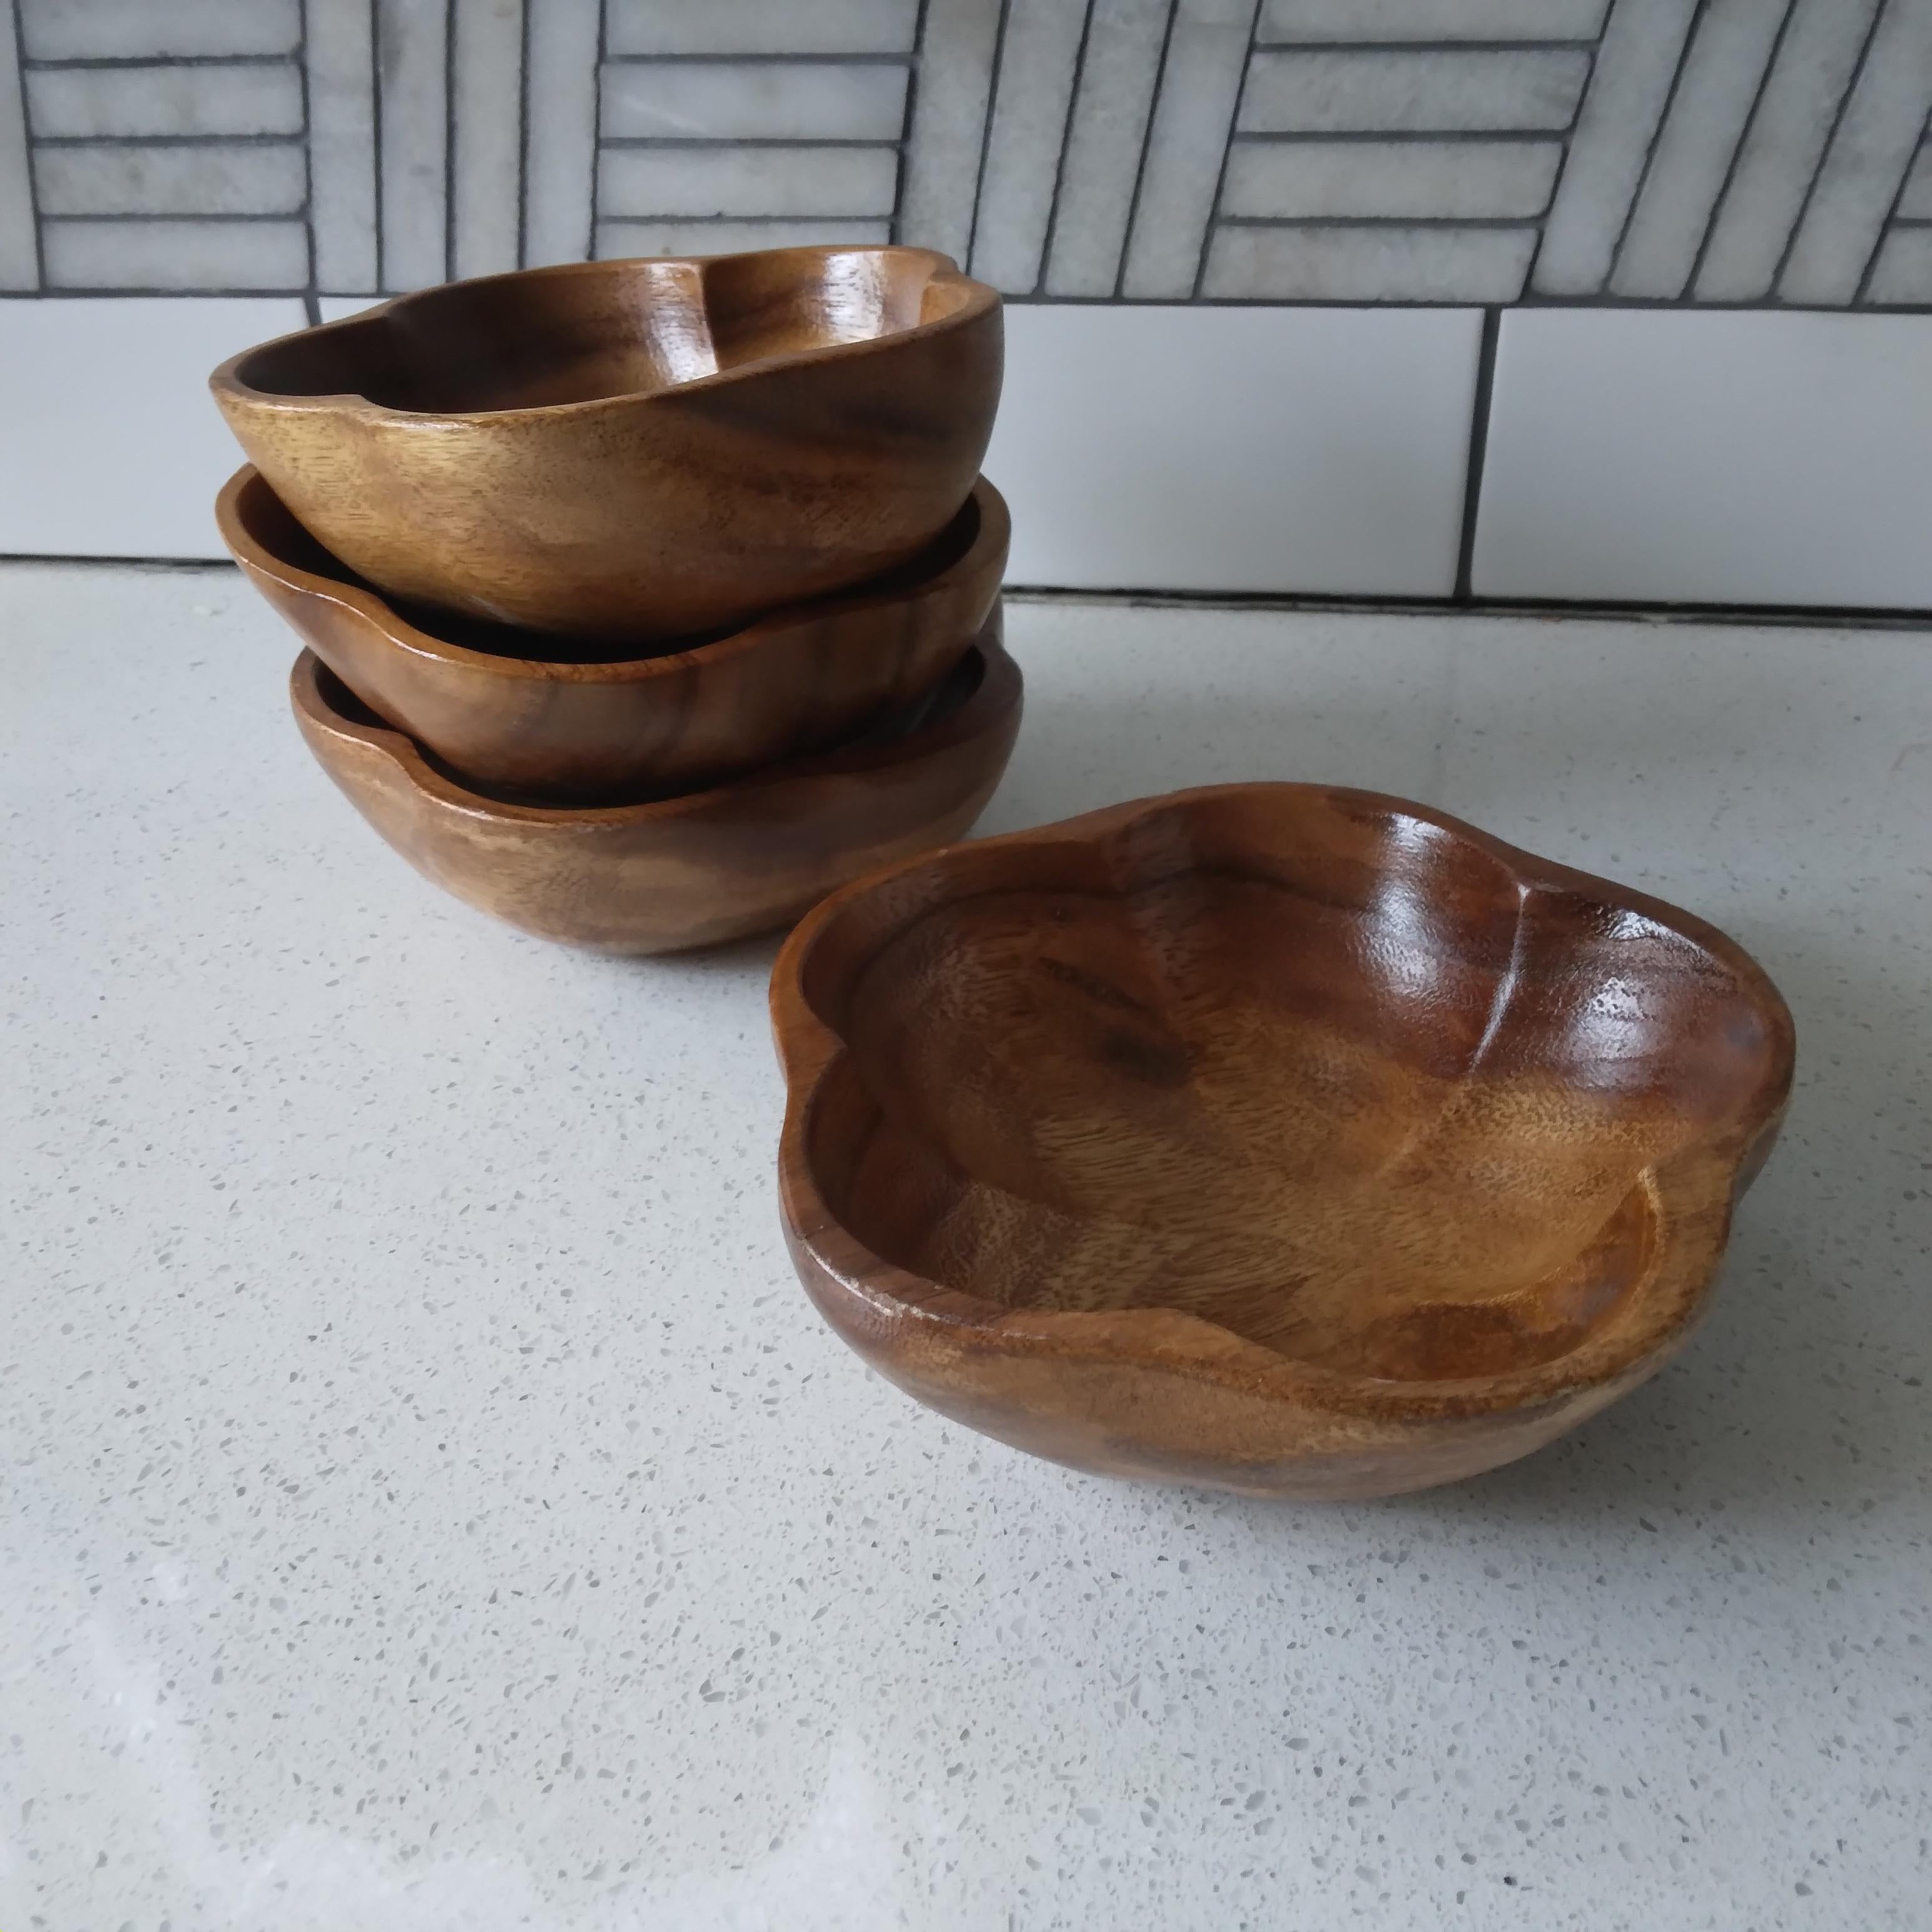 Gorgeous woodgrain and an adorable floral shape, this small bowls are a great way to add natural beauty to your dinnerware collection. 